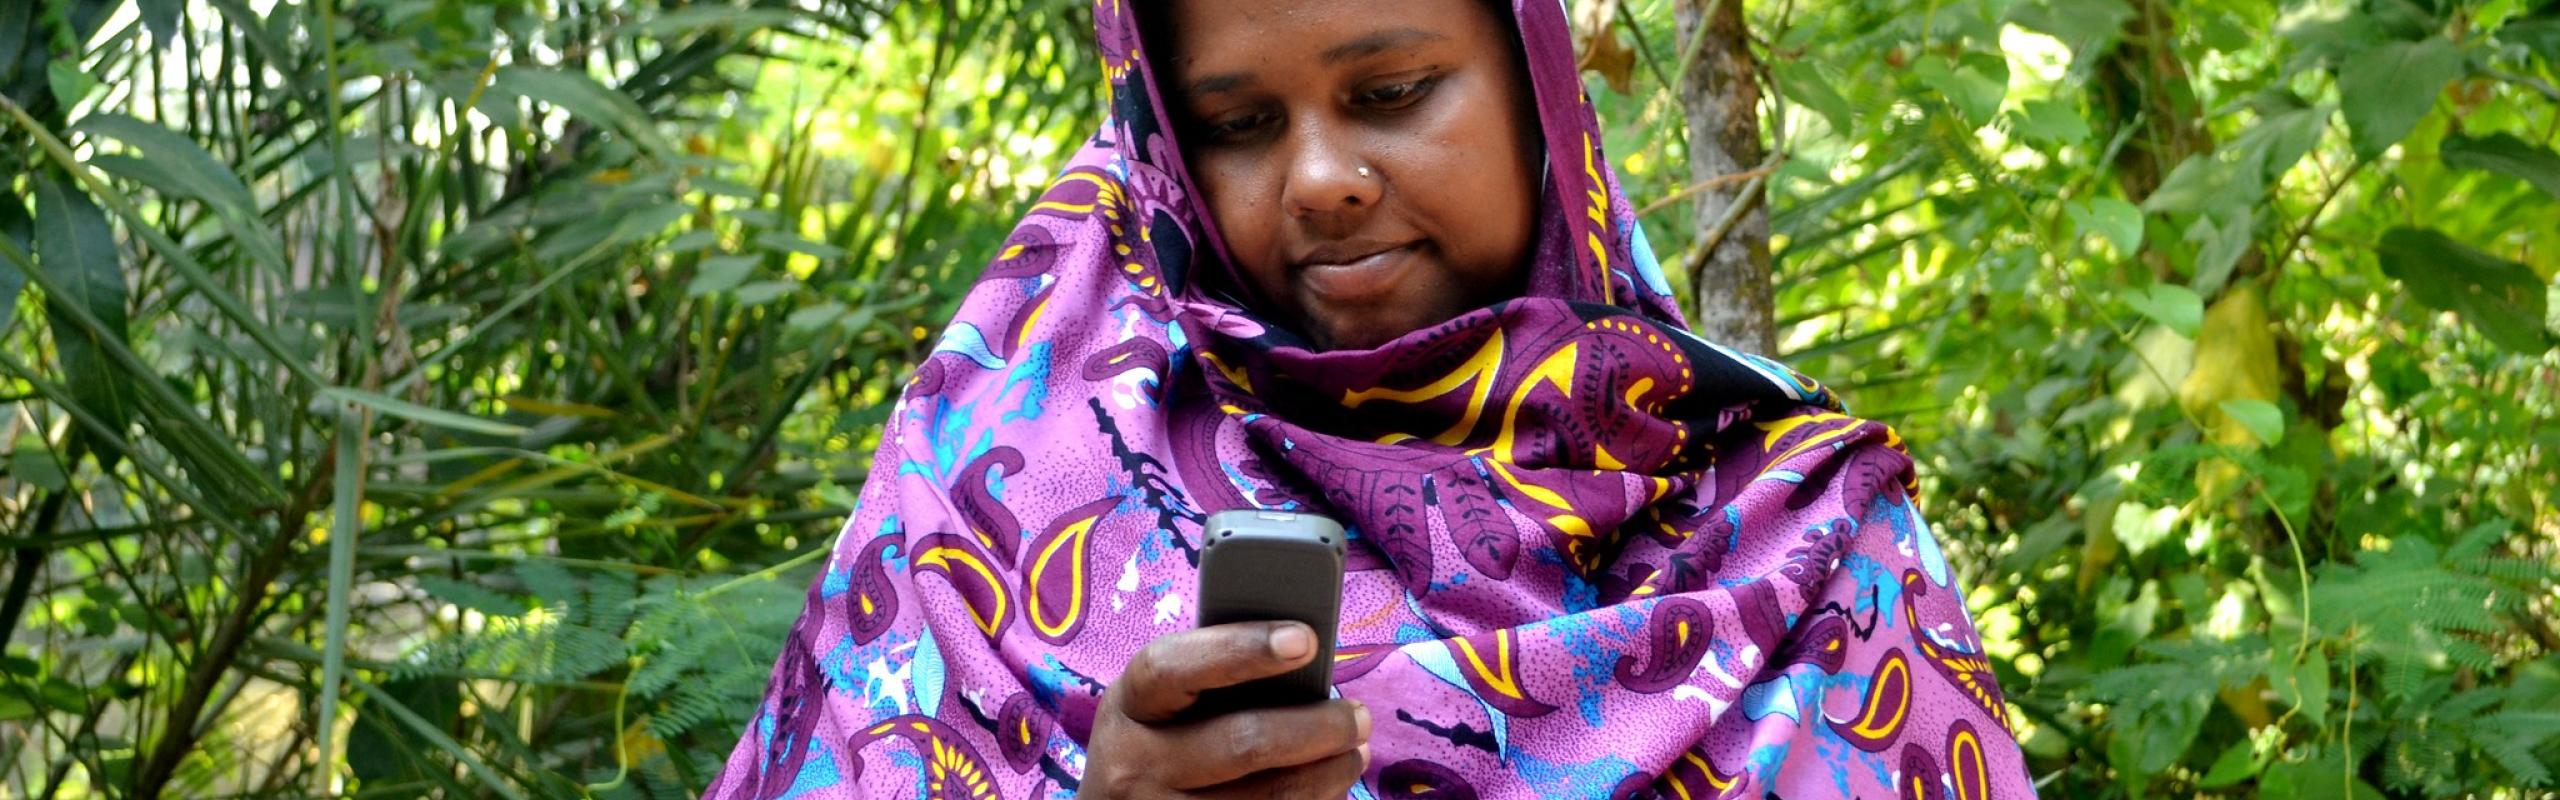 Female farmer in Bangladesh, dressed in purple headscarf, receives mobile money on her cellular phone